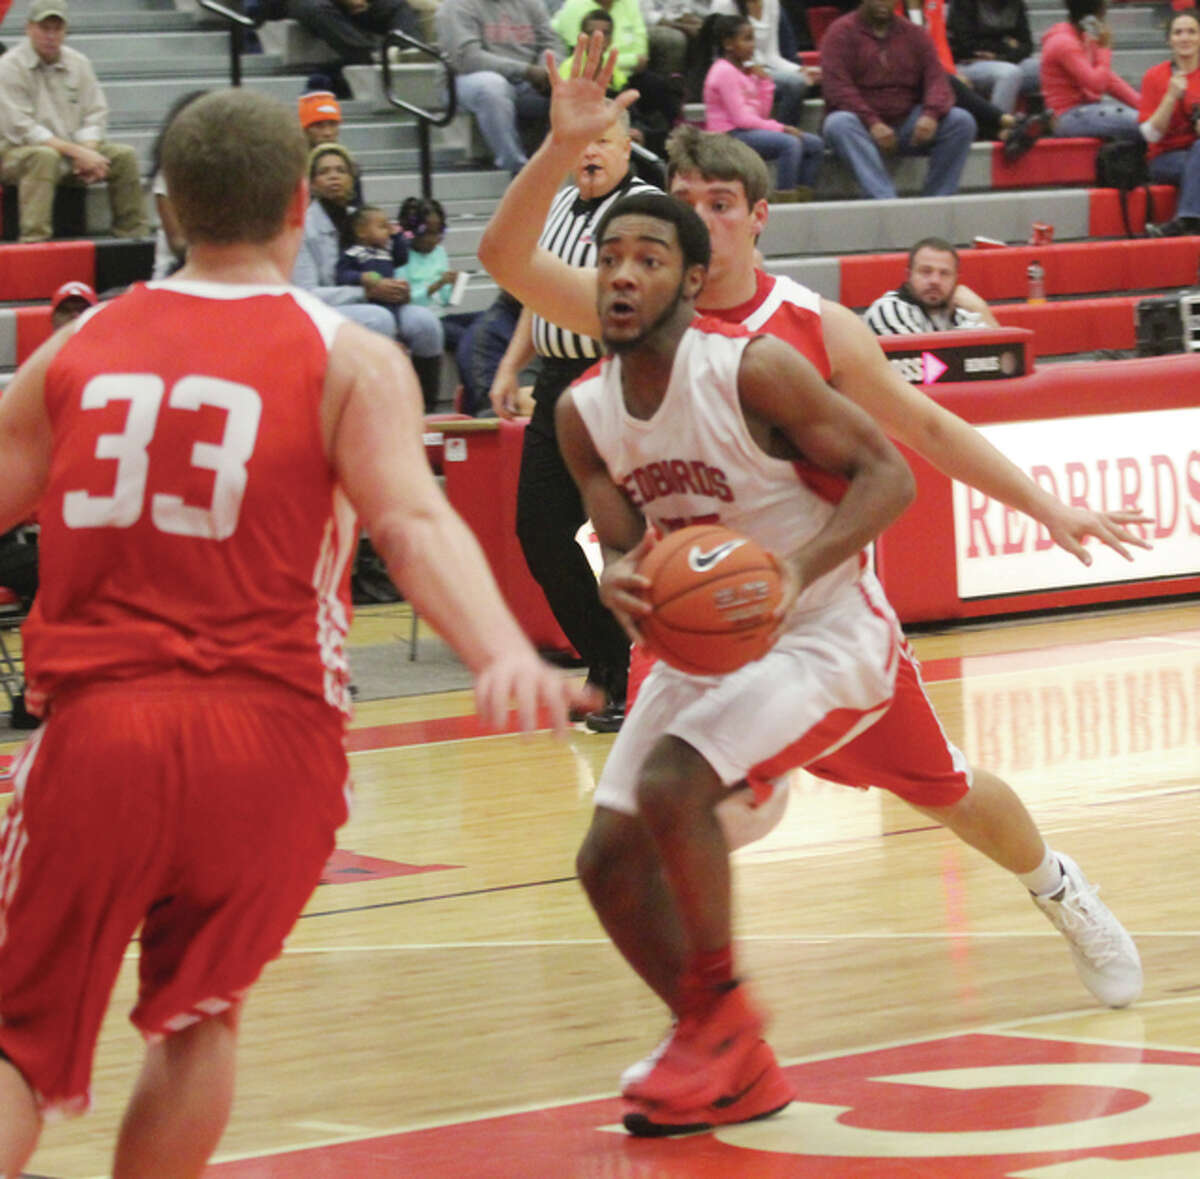 Alton’s Marcus Latham looks to the basket after getting past Jacksonville’s Joe Brannan while the Crimsons’ Tyler Rose (33) closes in on the play Saturday night at Alton High in Godfrey.